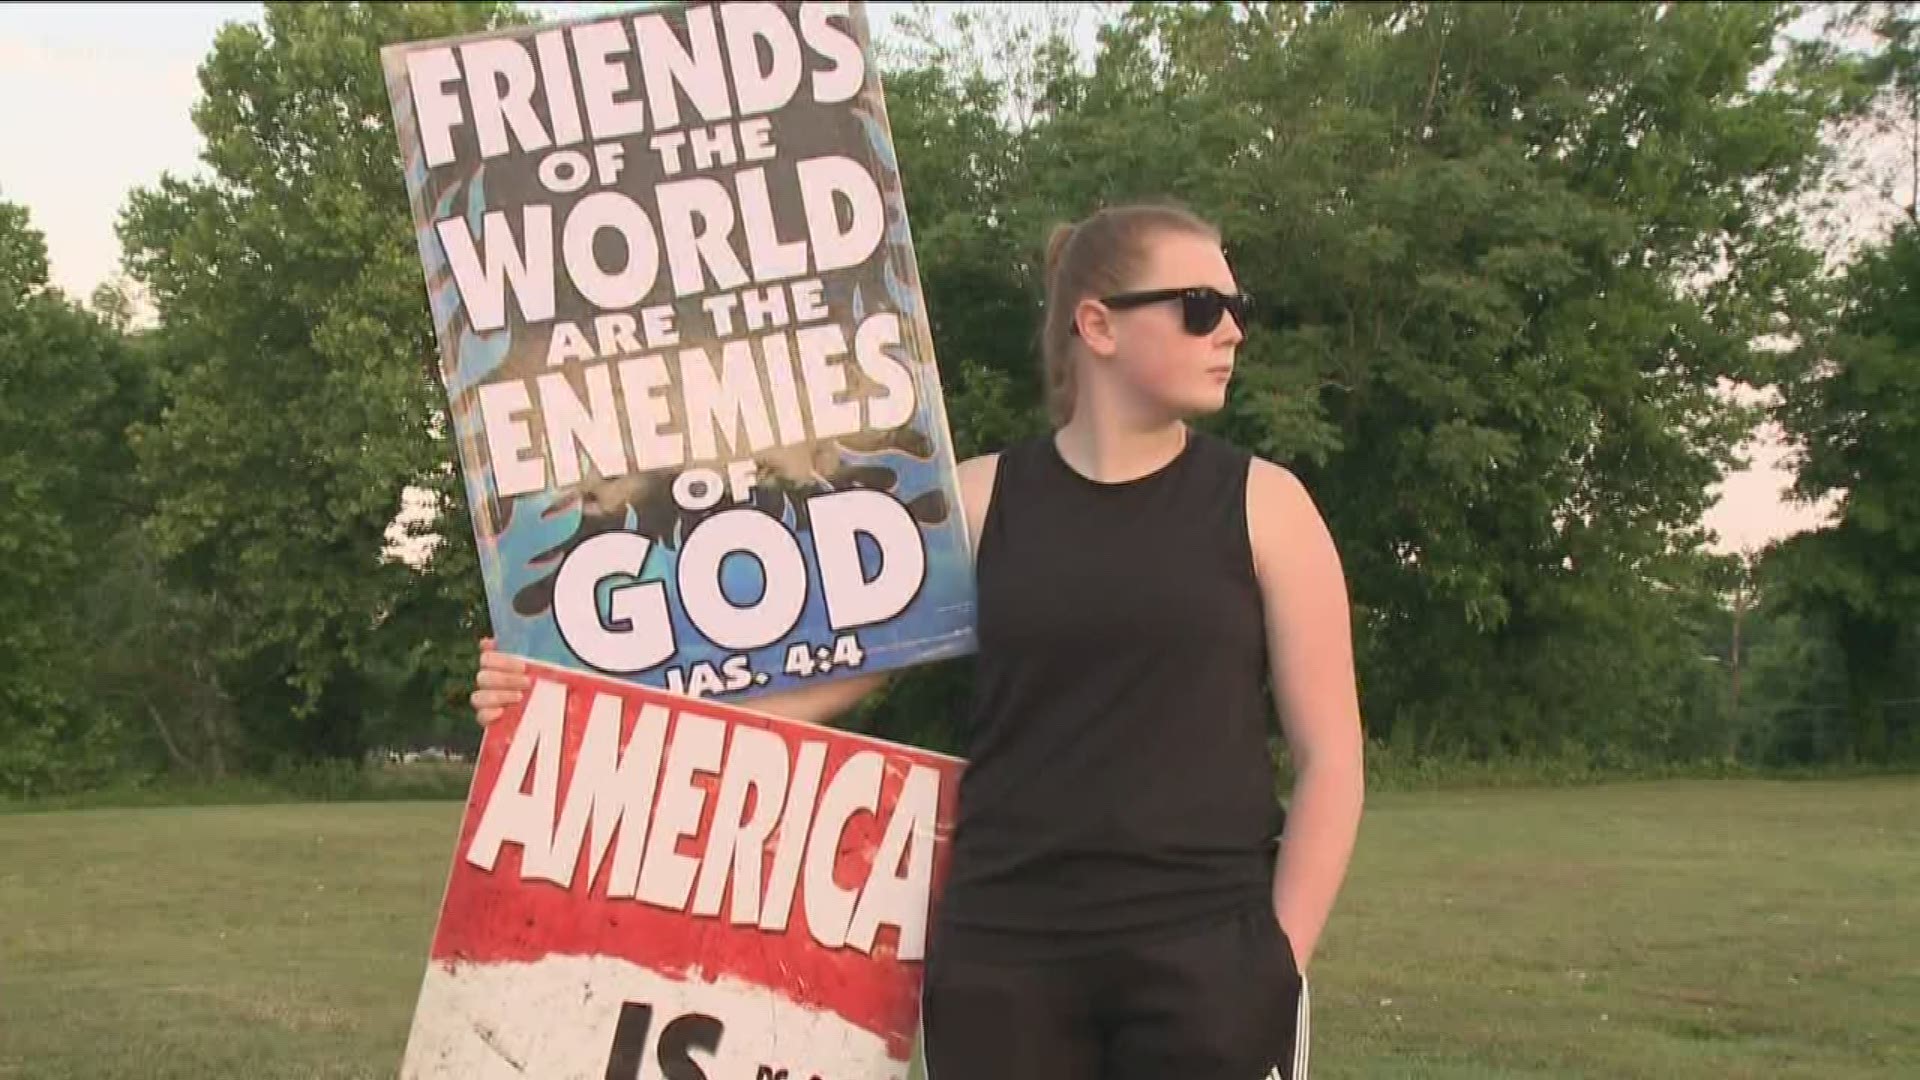 The demonstrators, from the Westboro Baptist Church in Topeka, Kan., have, for many years, been known for their hate speech which has fueled their nationwide protests.